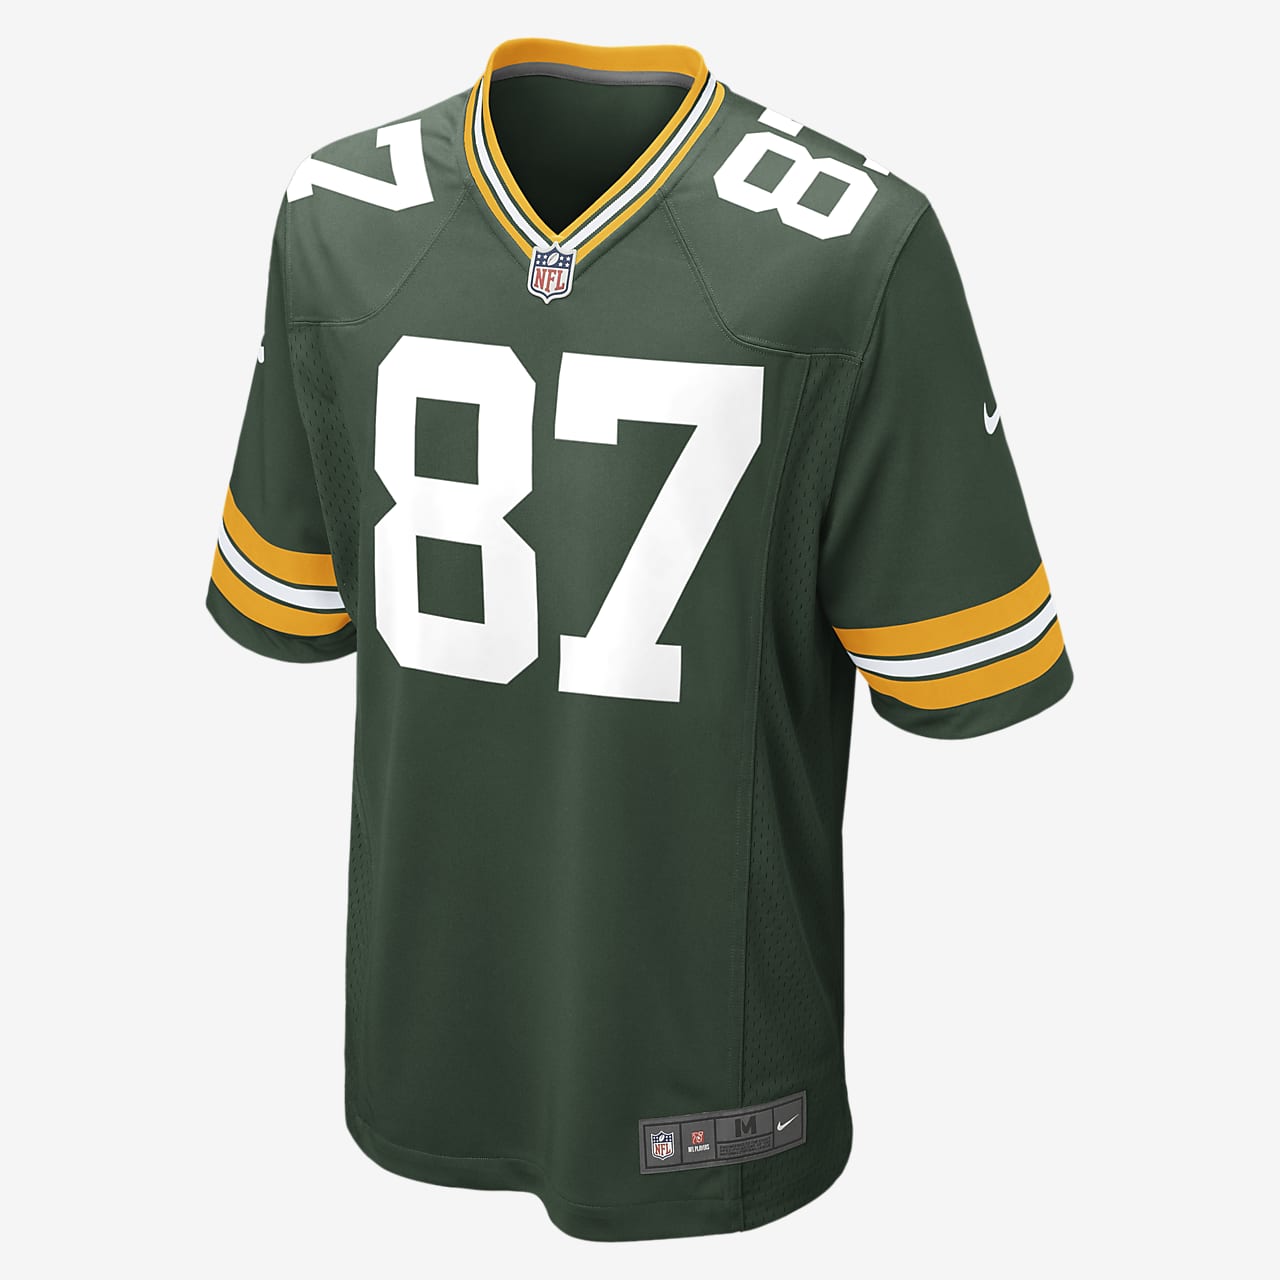 NFL Green Bay Packers (Jordy Nelson) Men's American Football Home Game Jersey